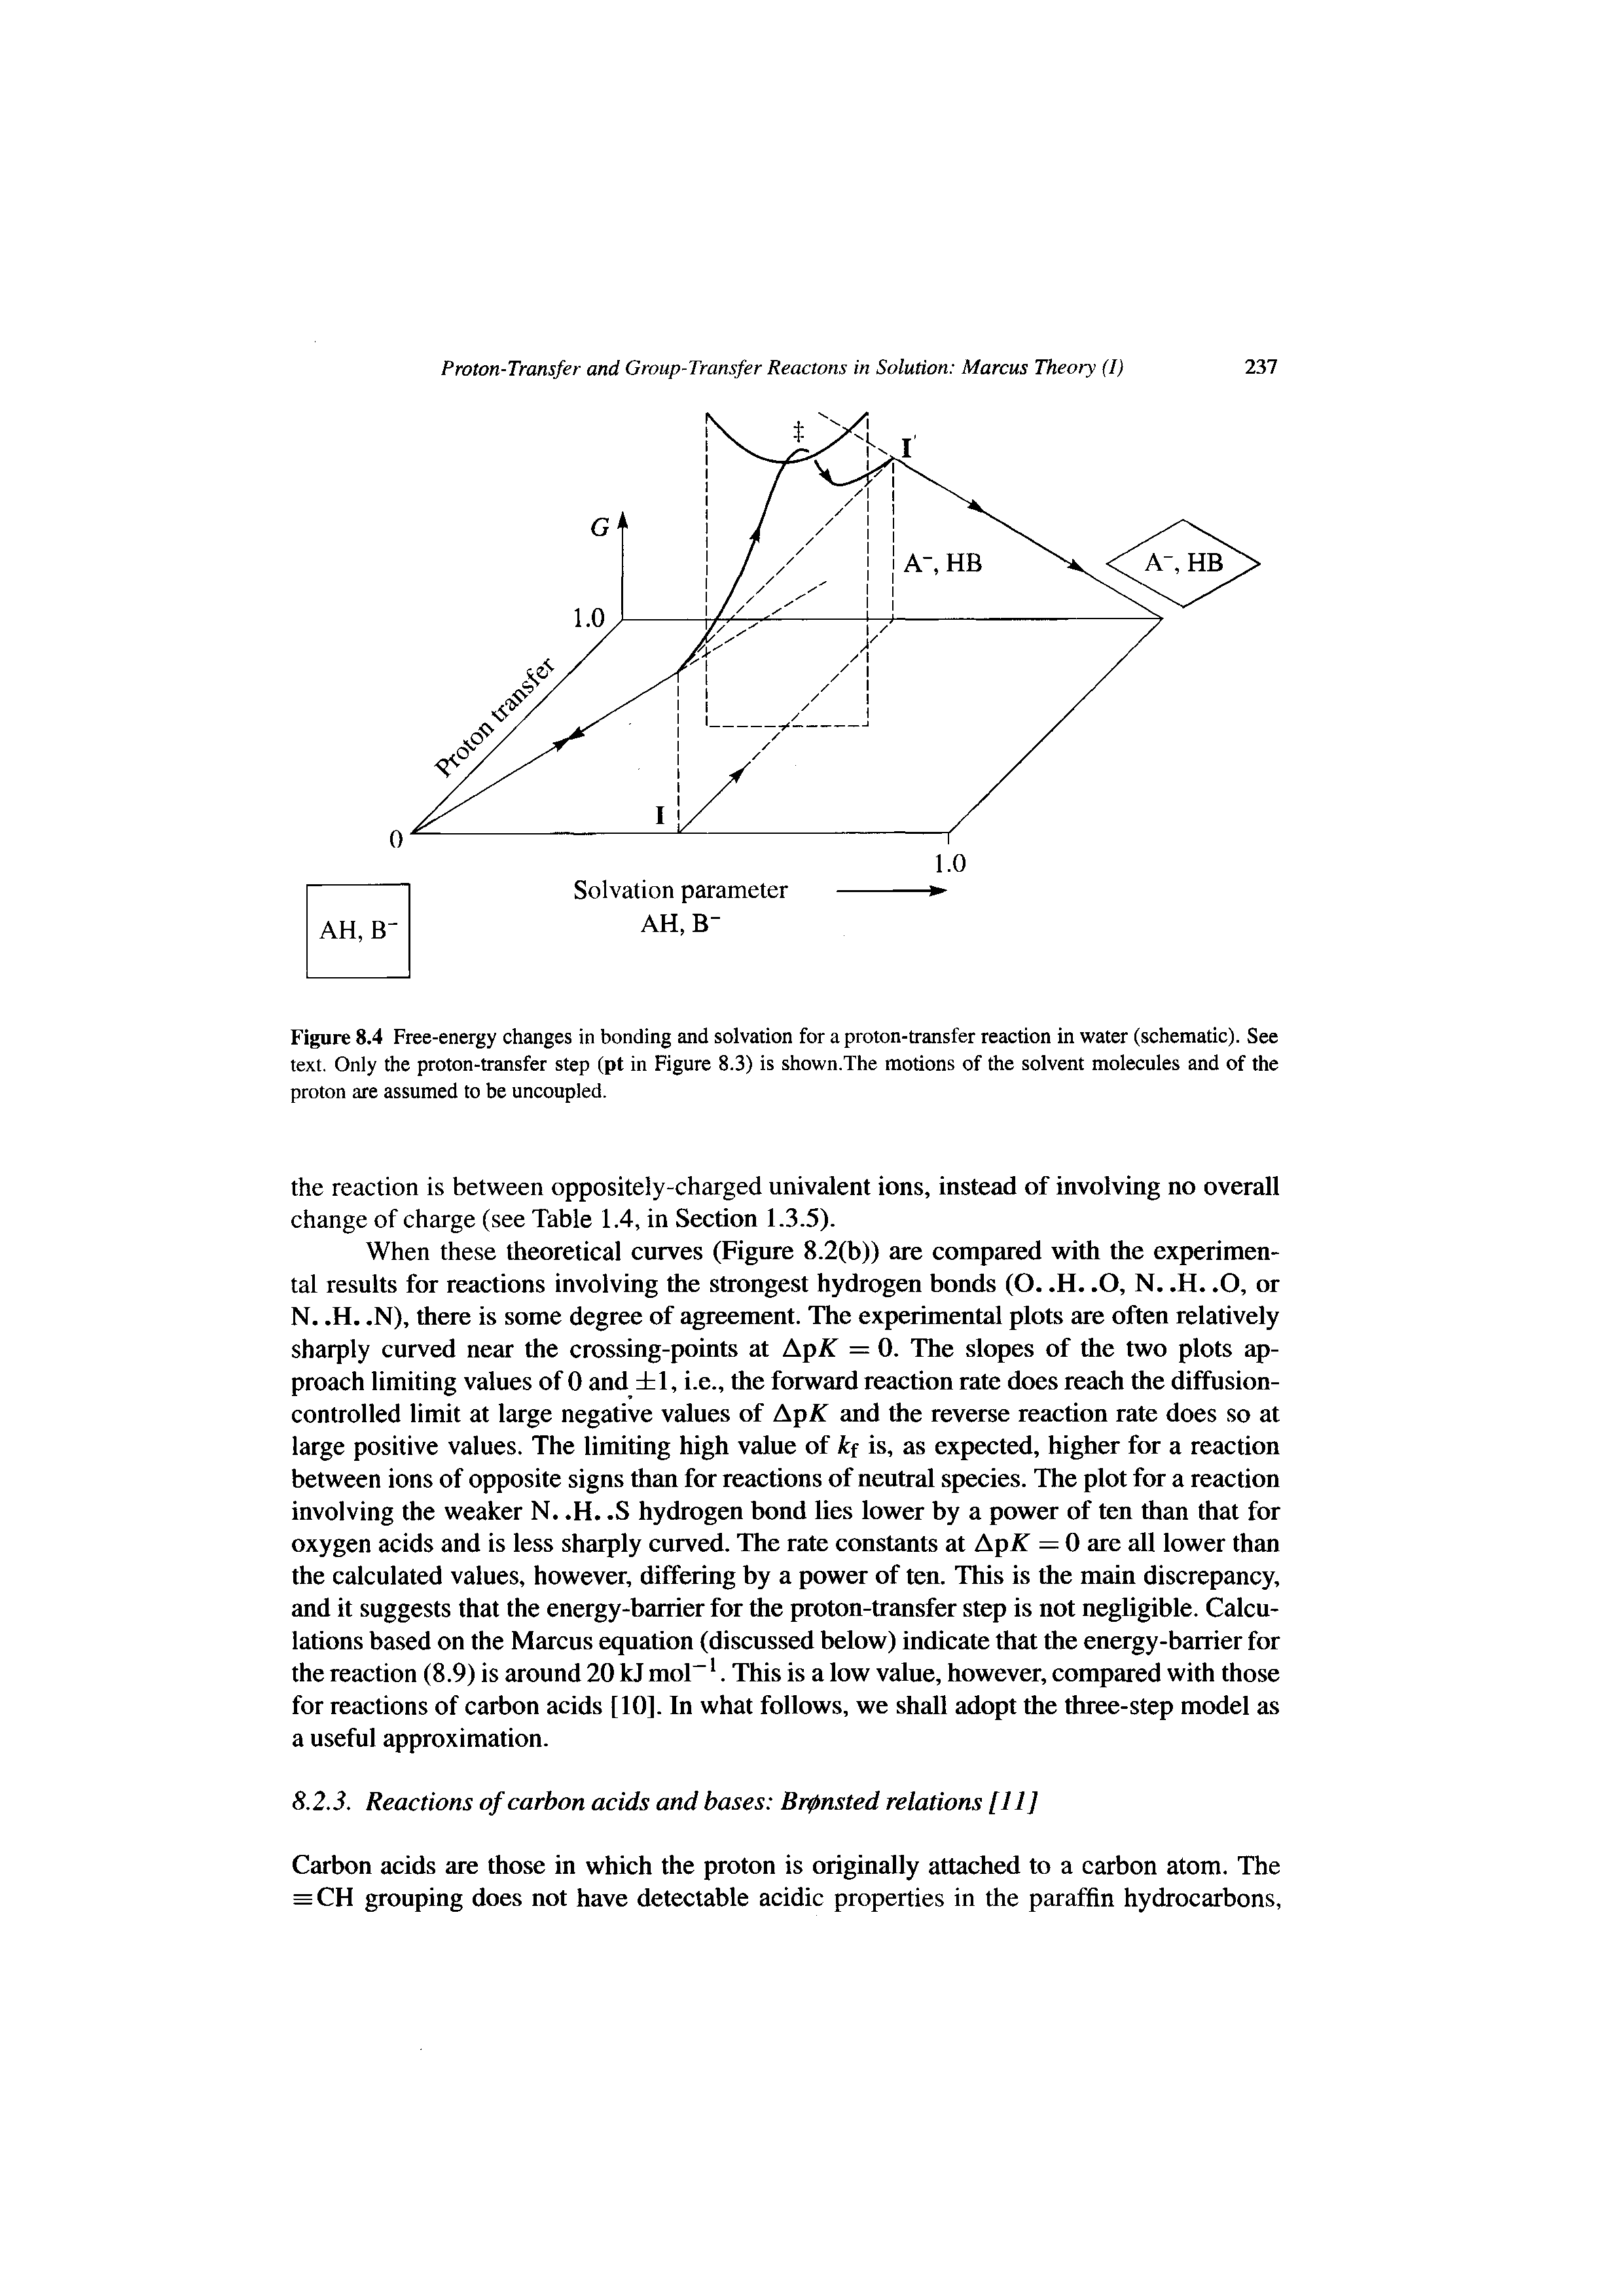 Figure 8.4 Free-energy changes in bonding and solvation for a proton-transfer reaction in water (schematic). See text. Only the proton-transfer step (pt in Figure 8.3) is shown.The motions of the solvent molecules and of the proton are assumed to be uncoupled.